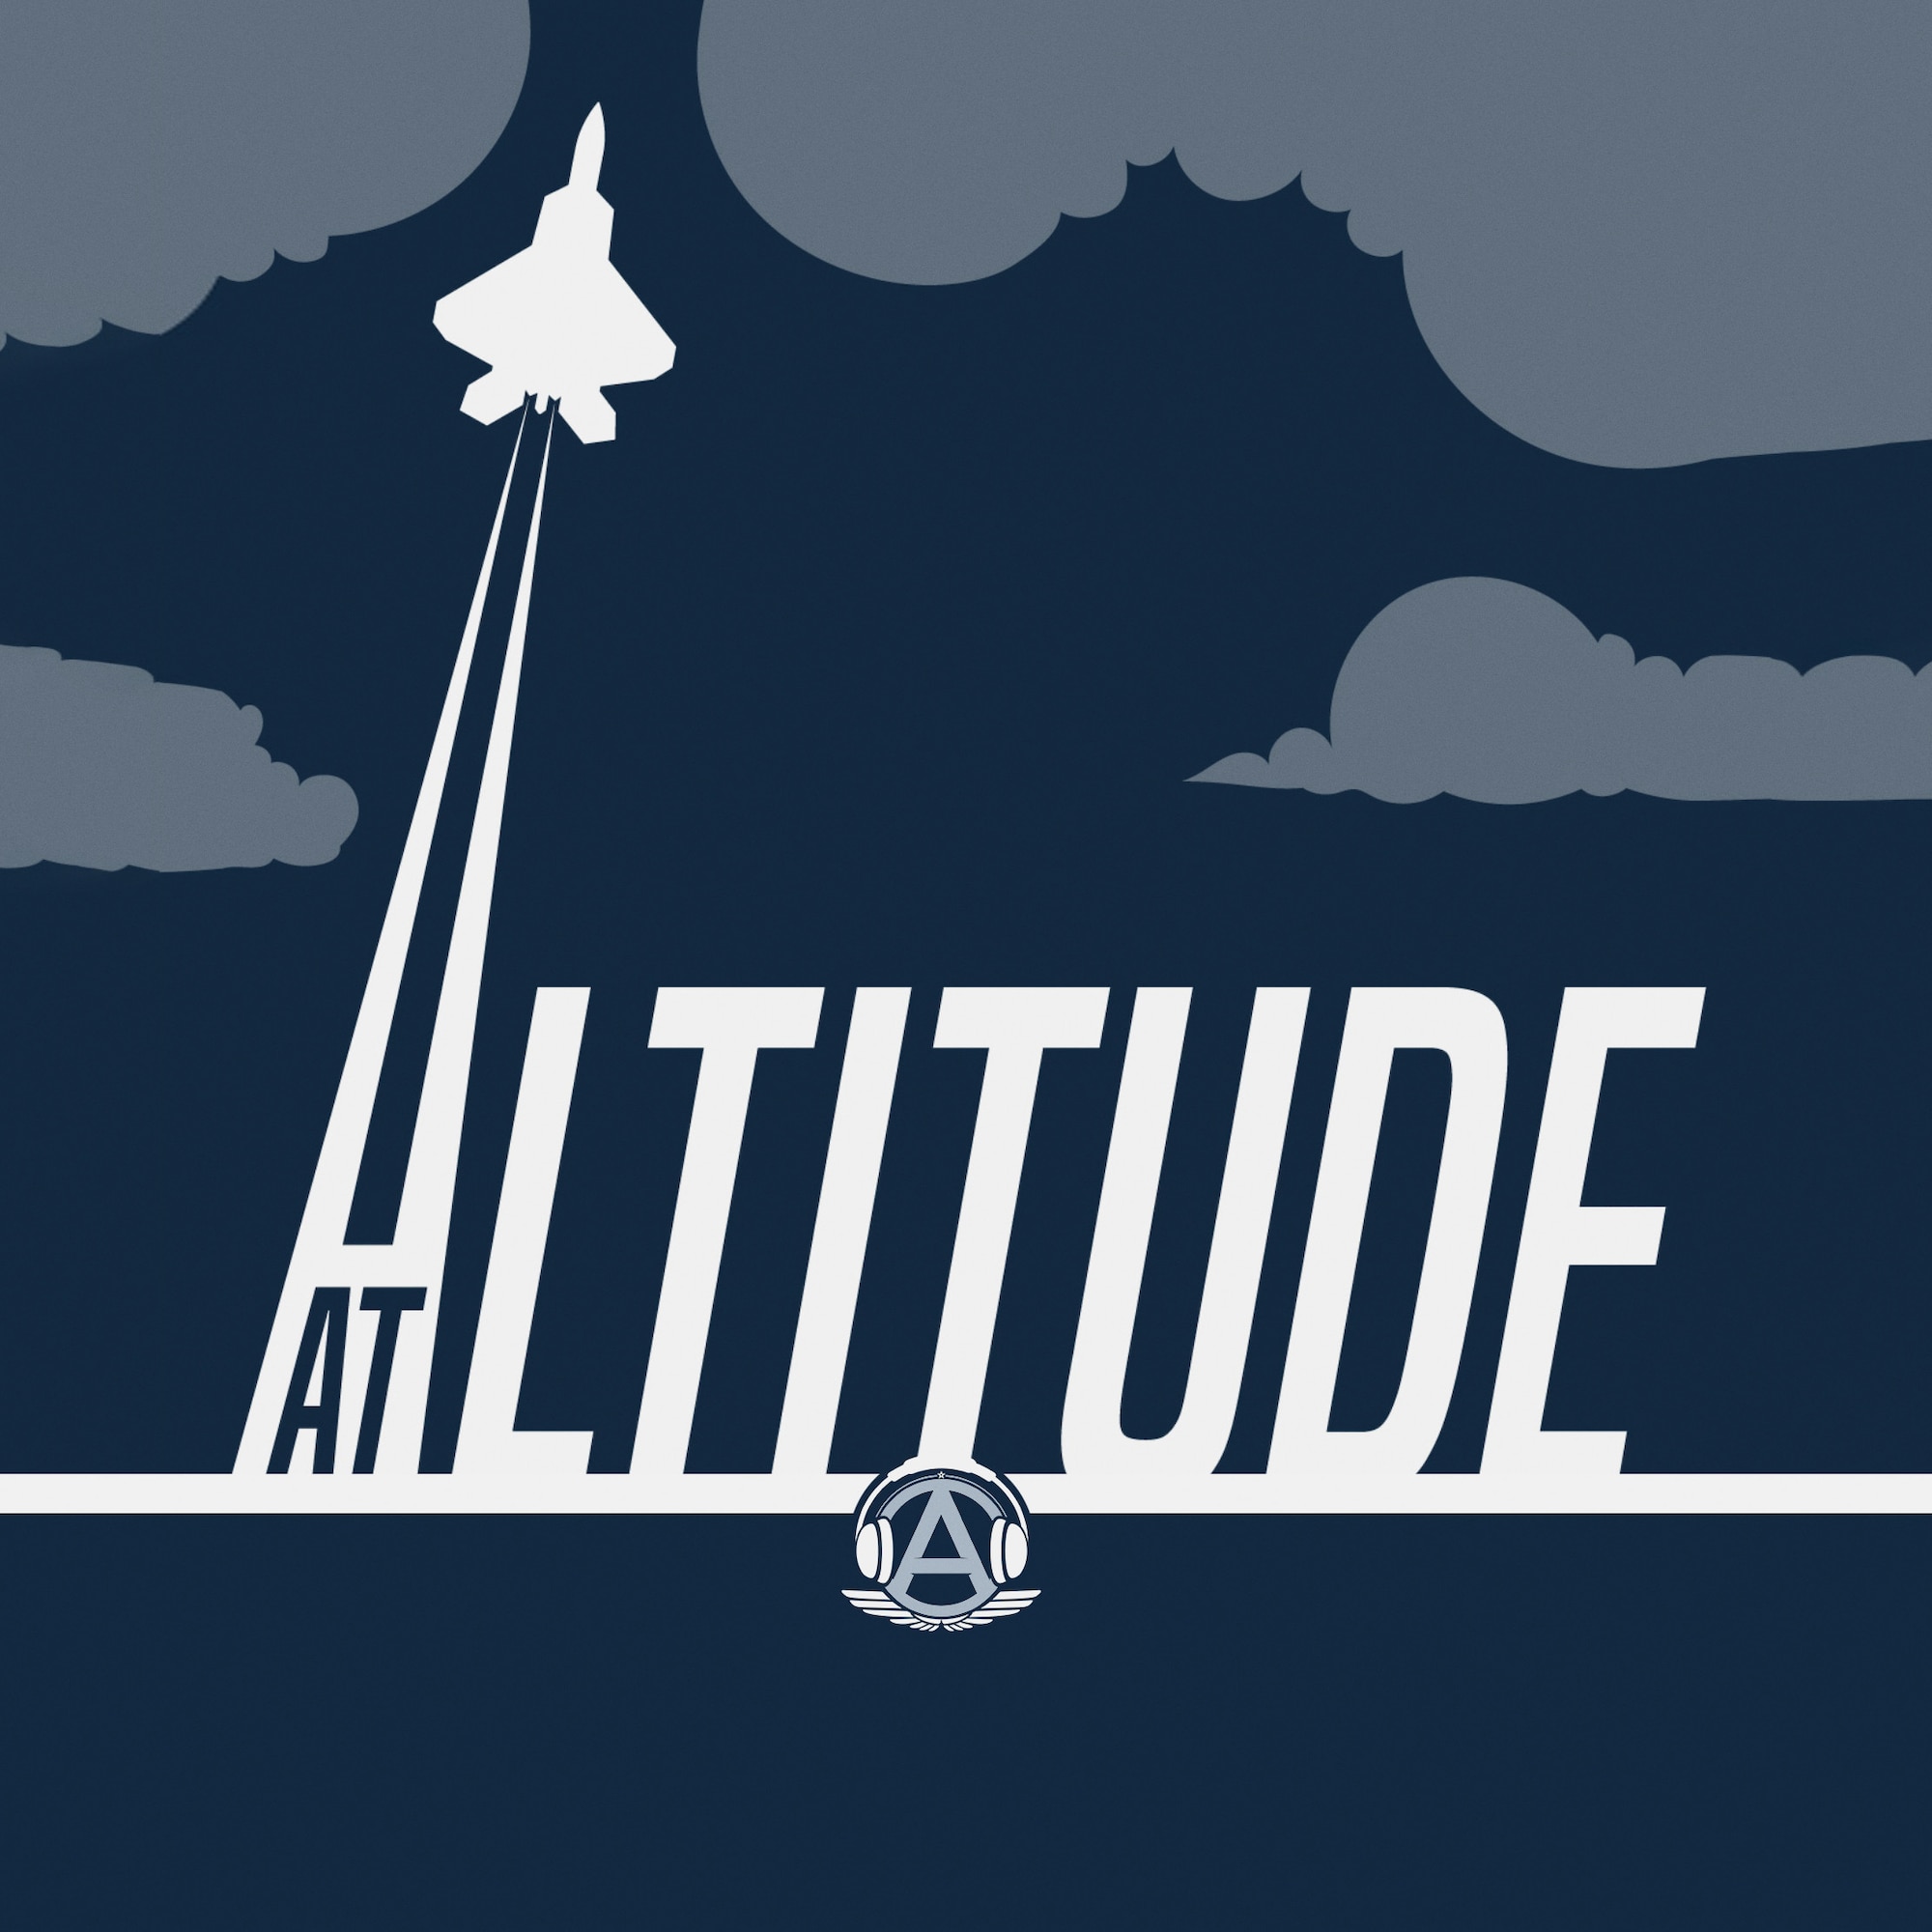 At Altitude Podcast